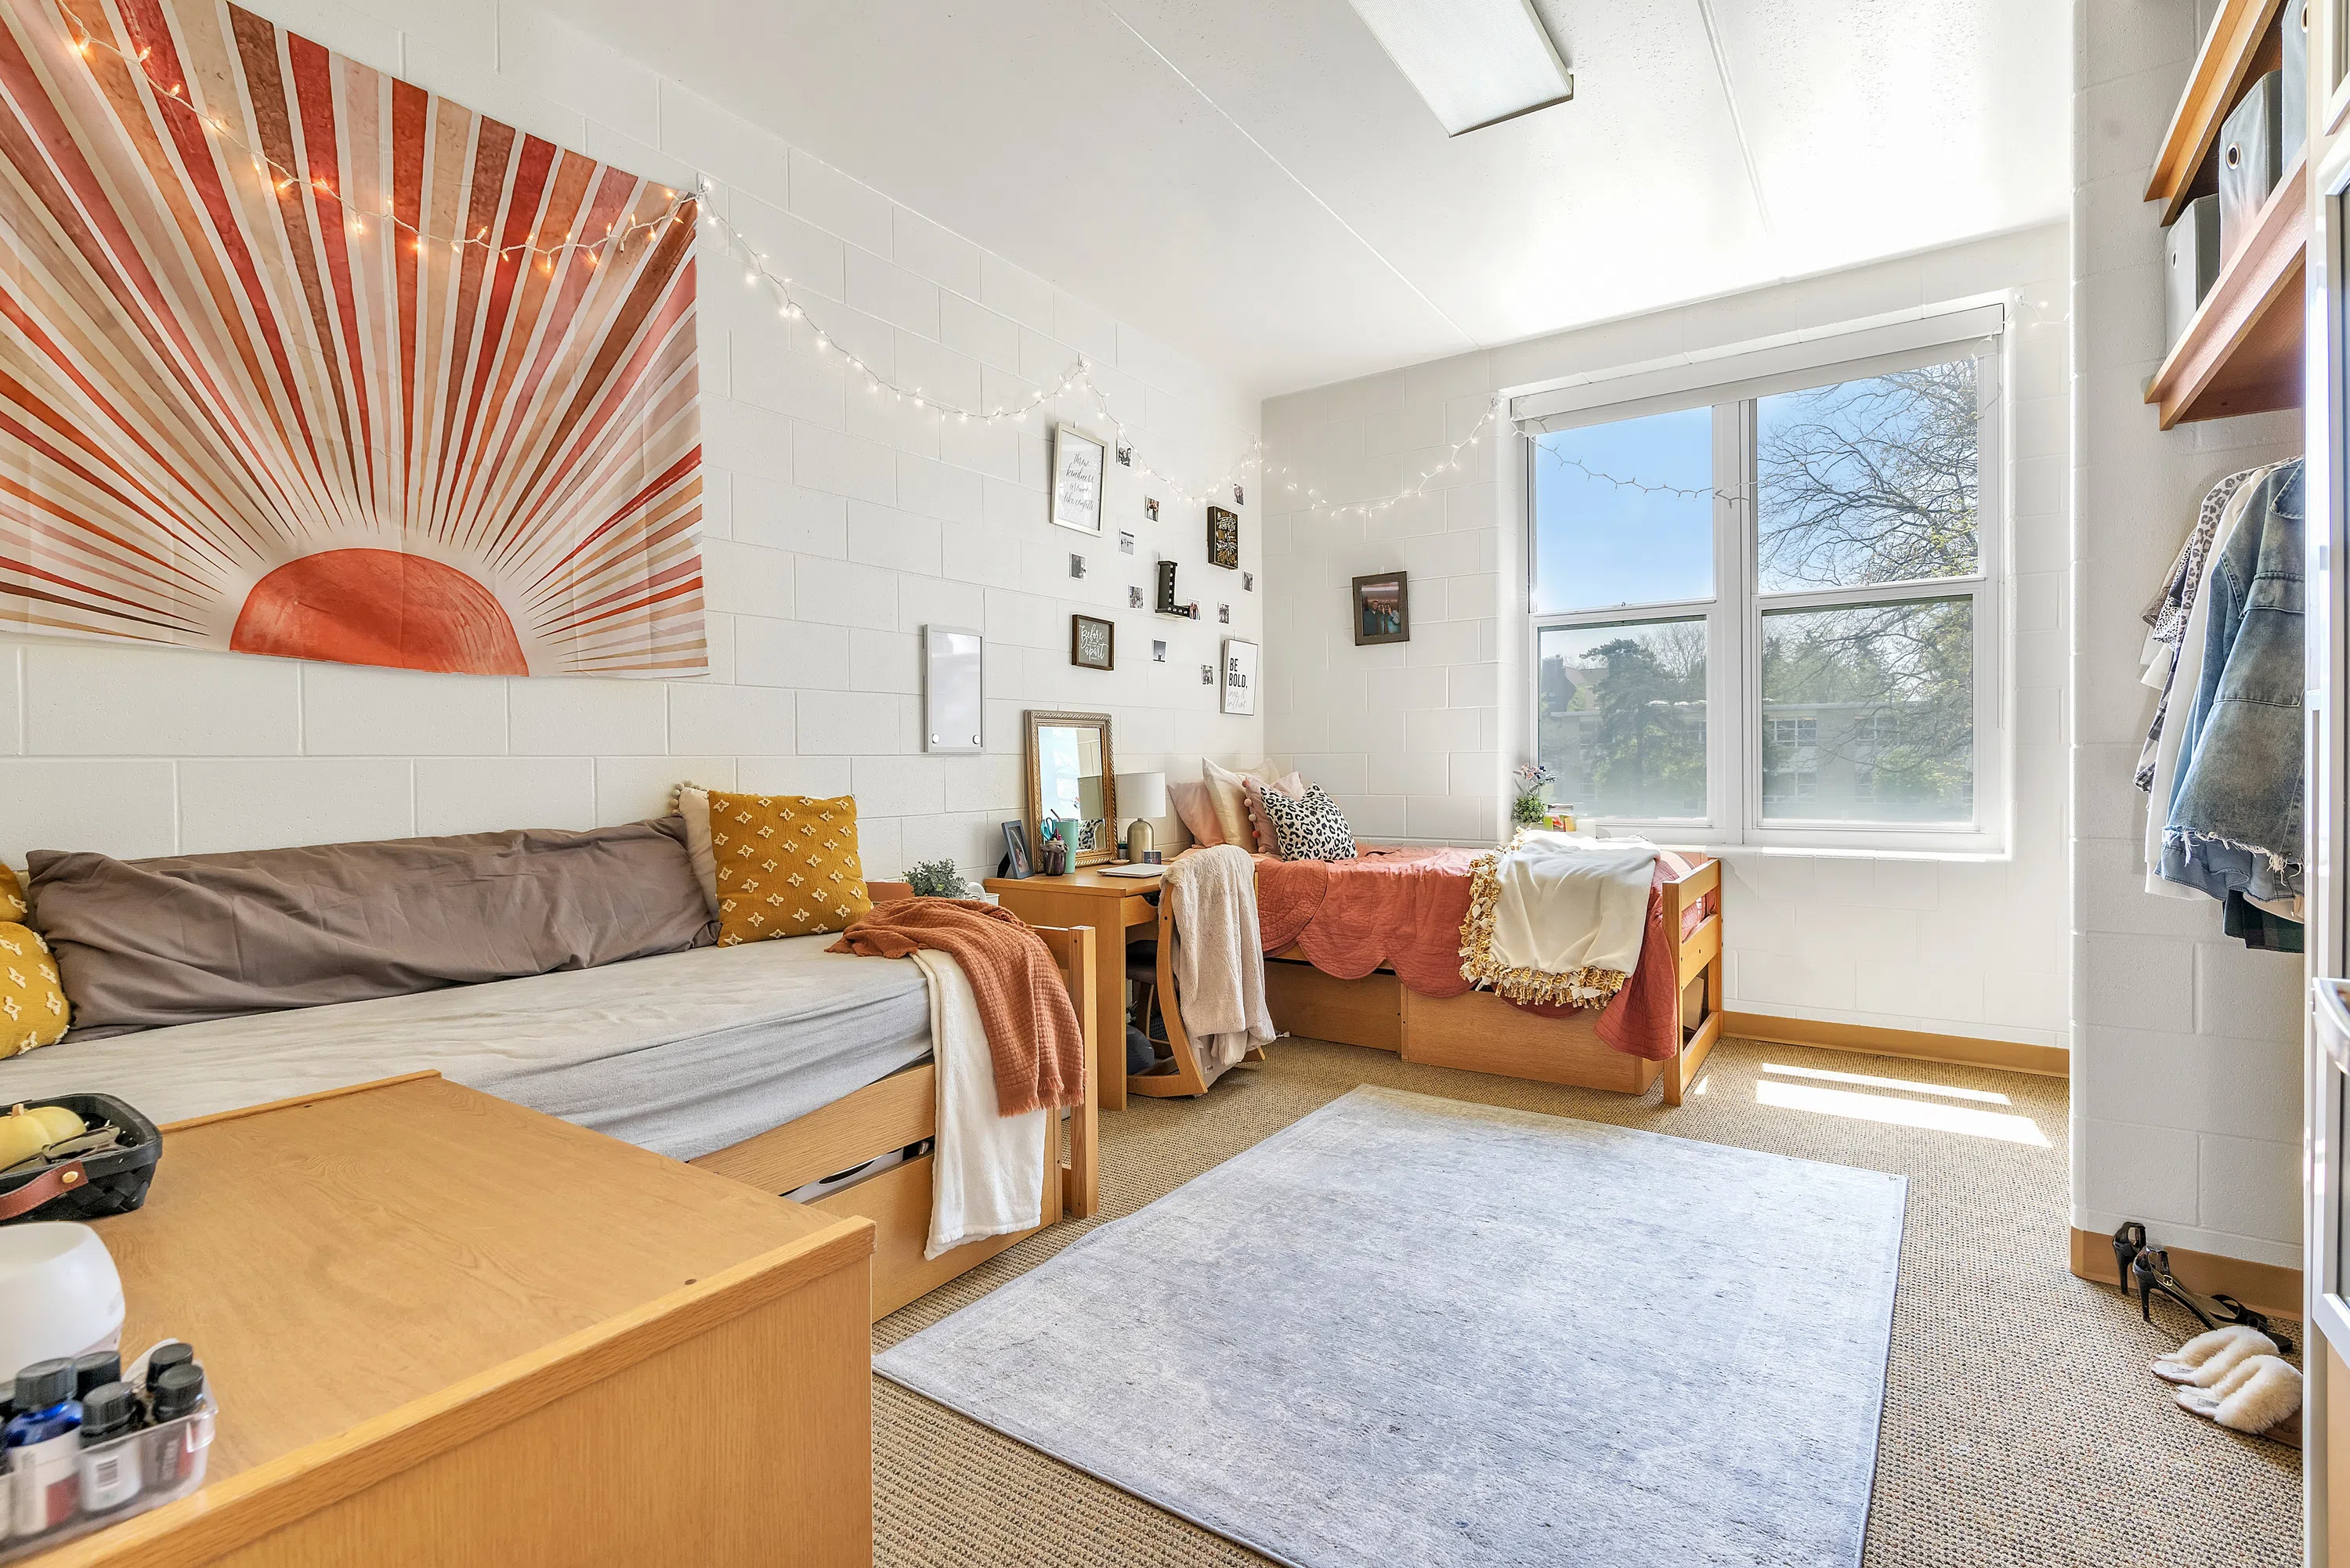 Interior of a women's residence hall room